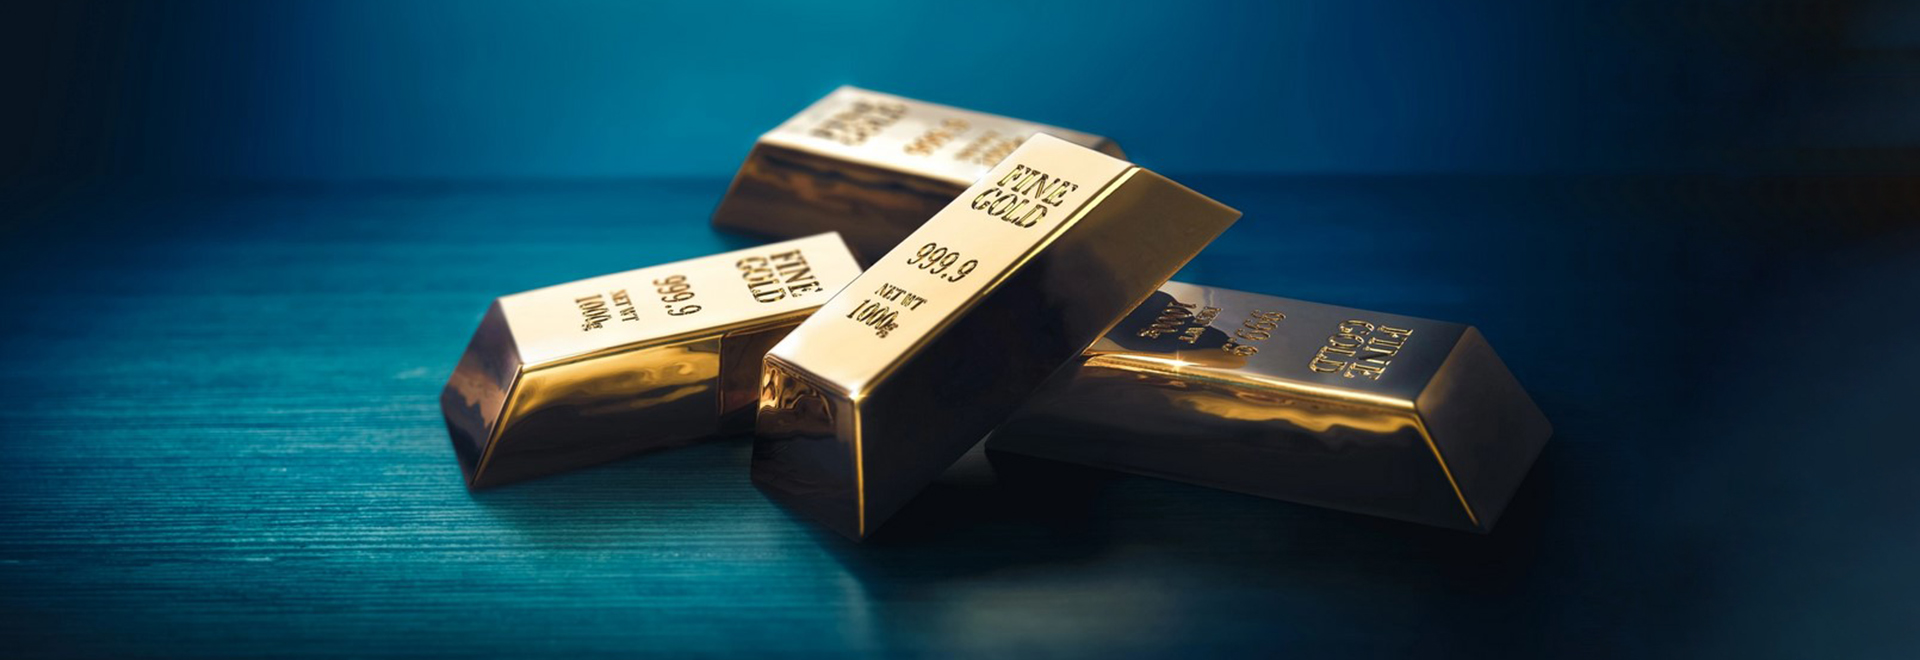 Gold demand surges ahead of the expected FED hike